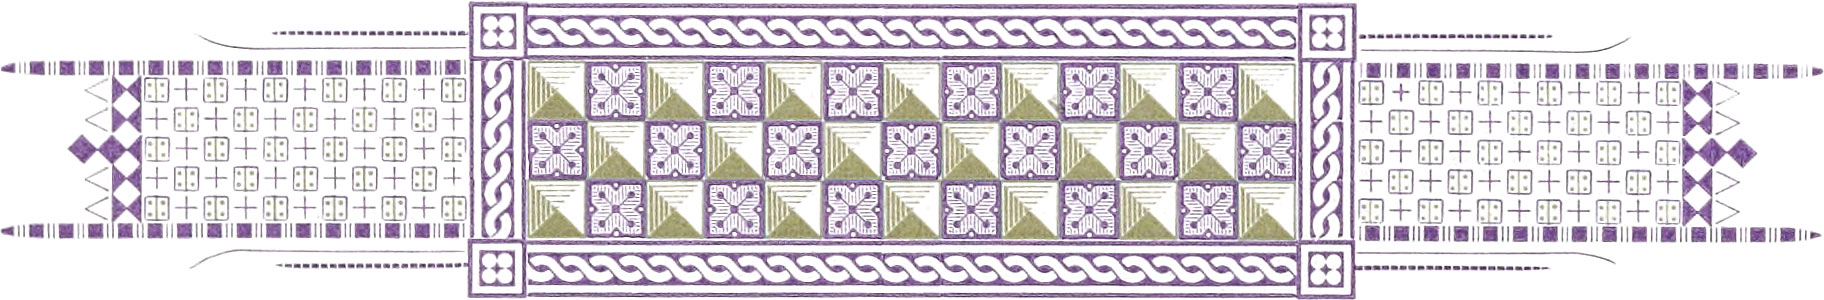 Checkered orange border comprising violet and yellow-gray colors